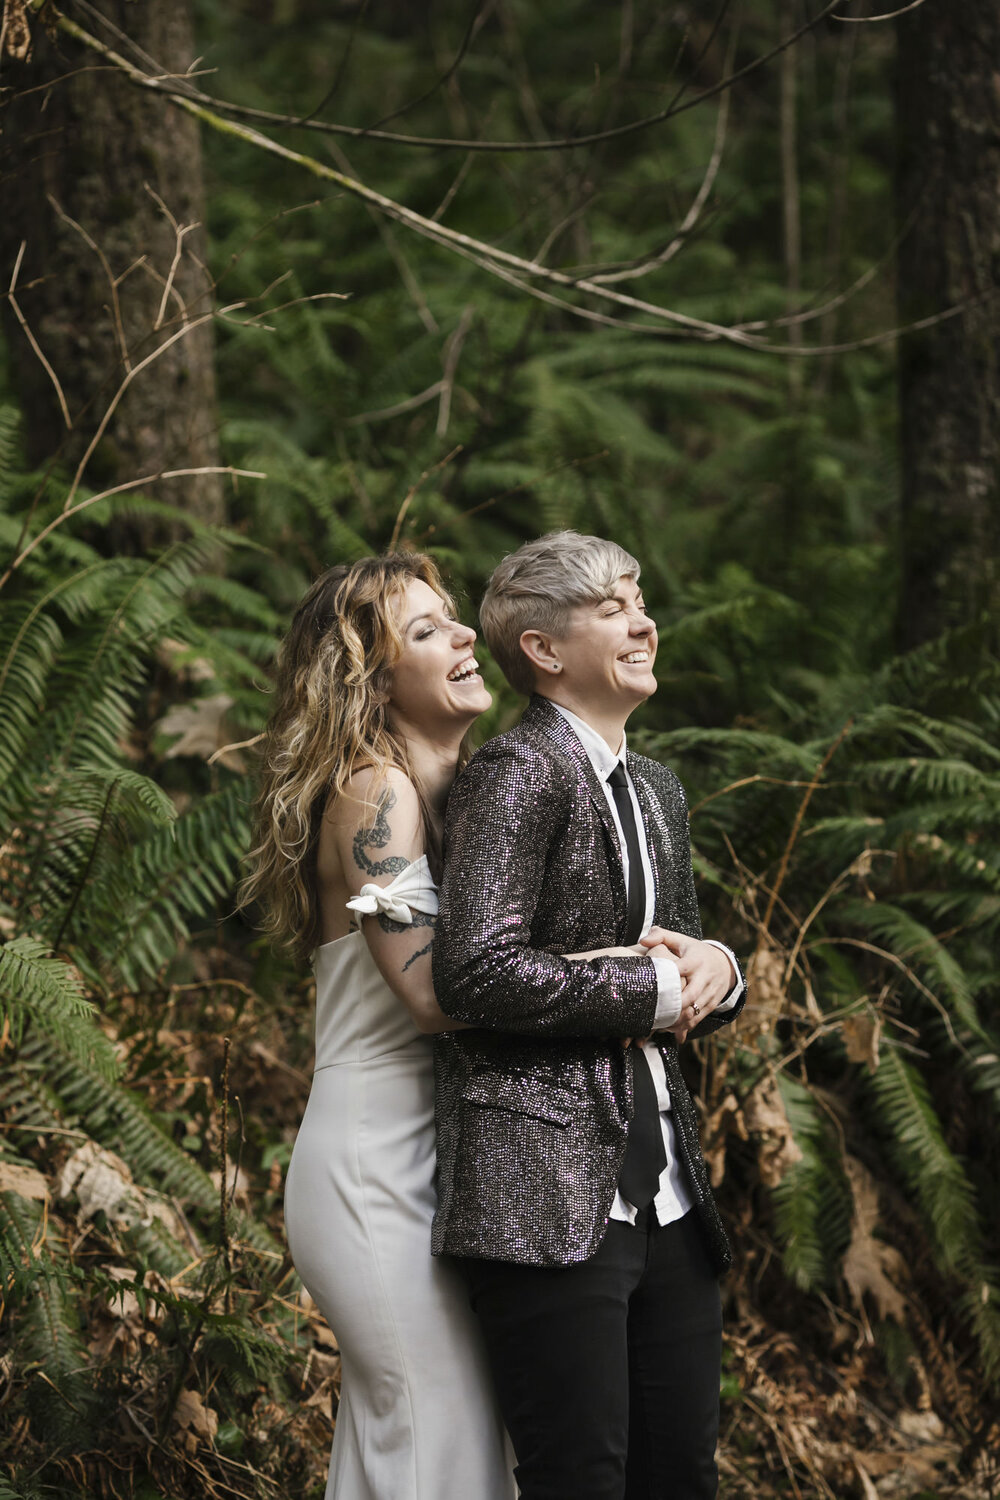 Wedding couple laugh with each other during their portraits on their elopement day